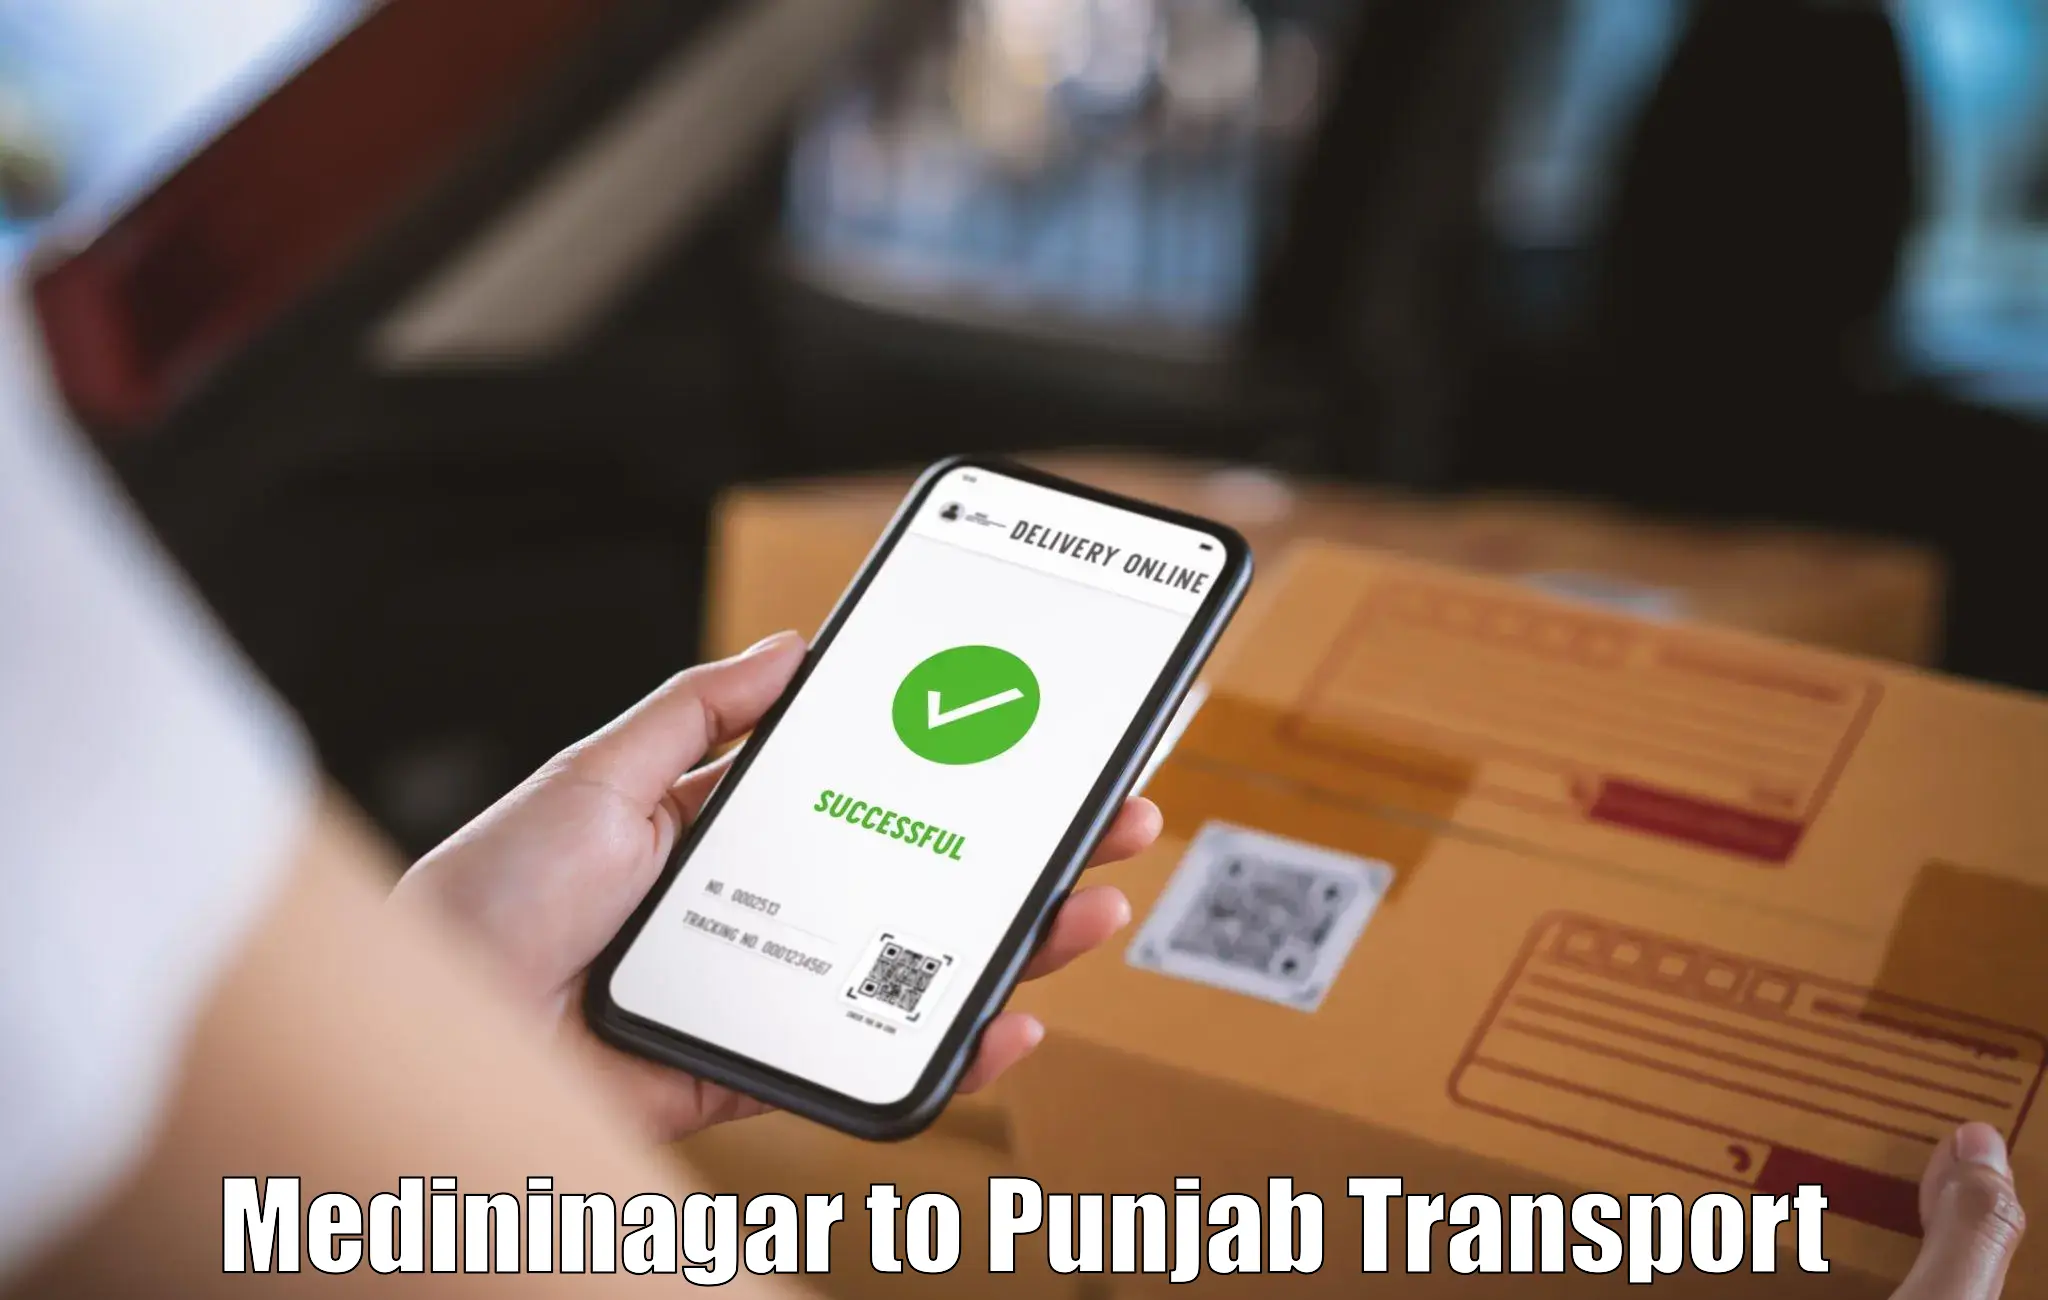 Transport bike from one state to another Medininagar to Amritsar